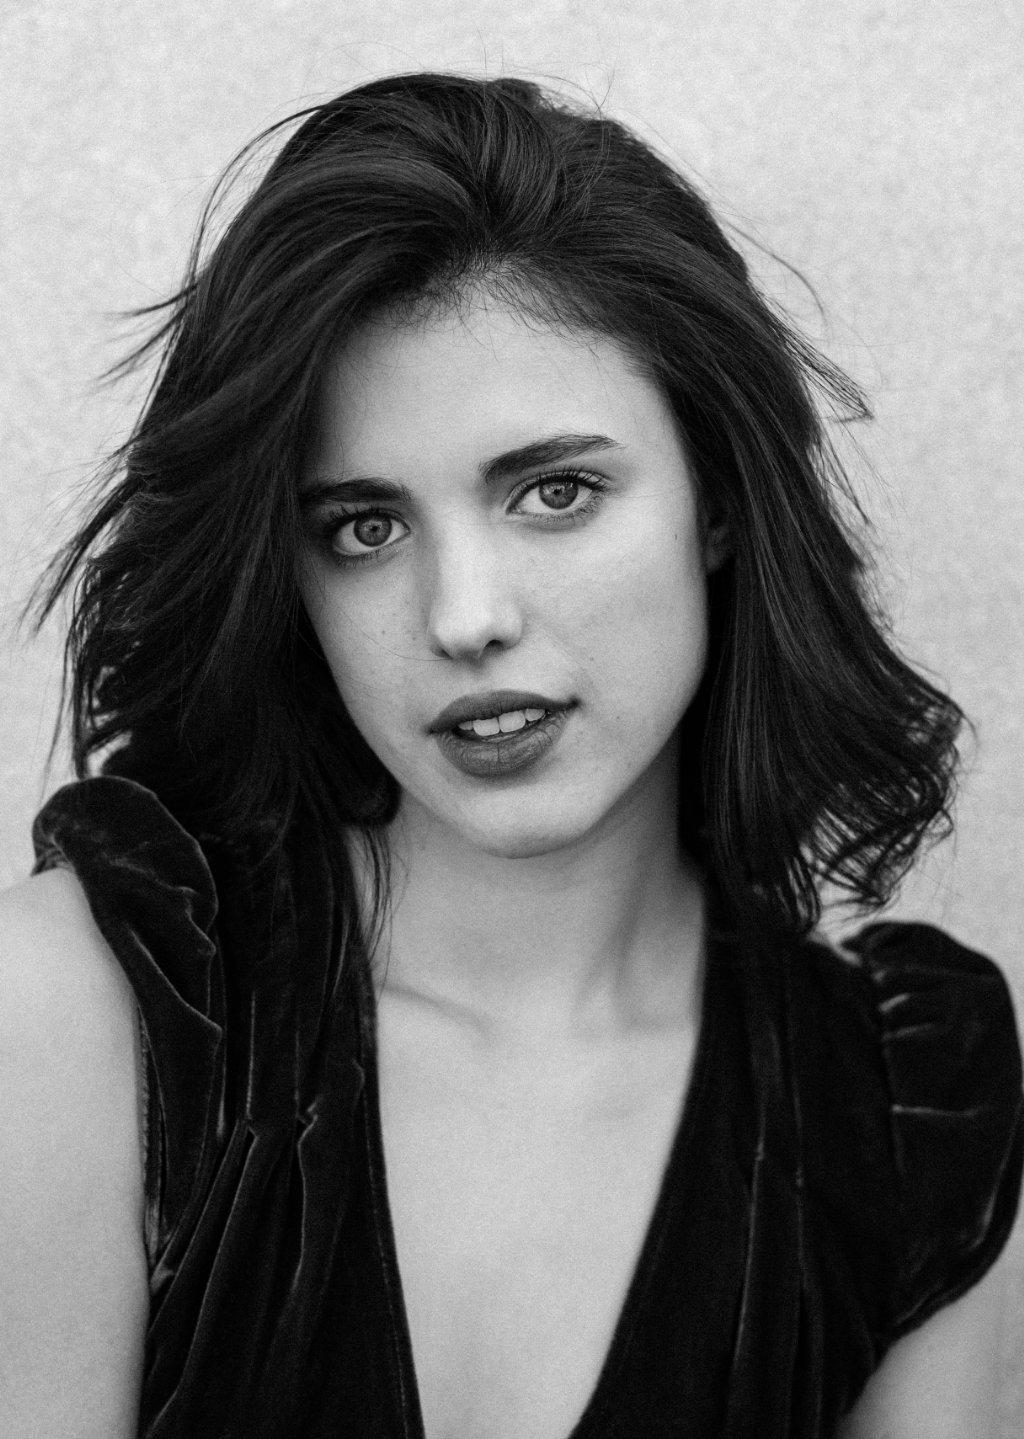 Margaret QUALLEY, Biography and movies